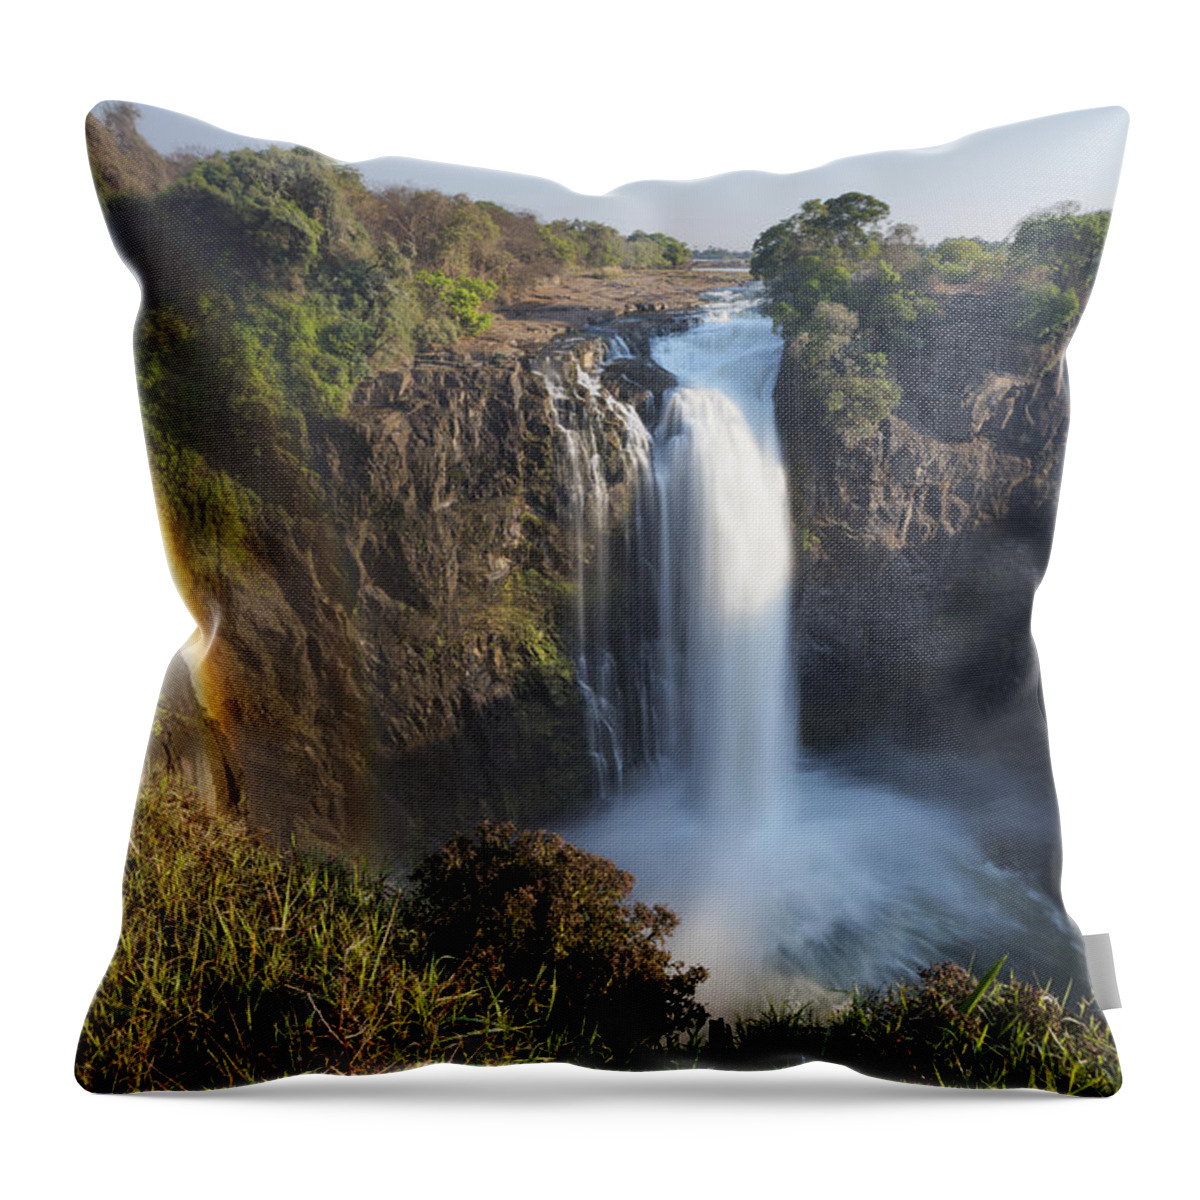 Vincent Grafhorst Throw Pillow featuring the photograph Rainbow In The Mist Of Victoria Falls by Vincent Grafhorst